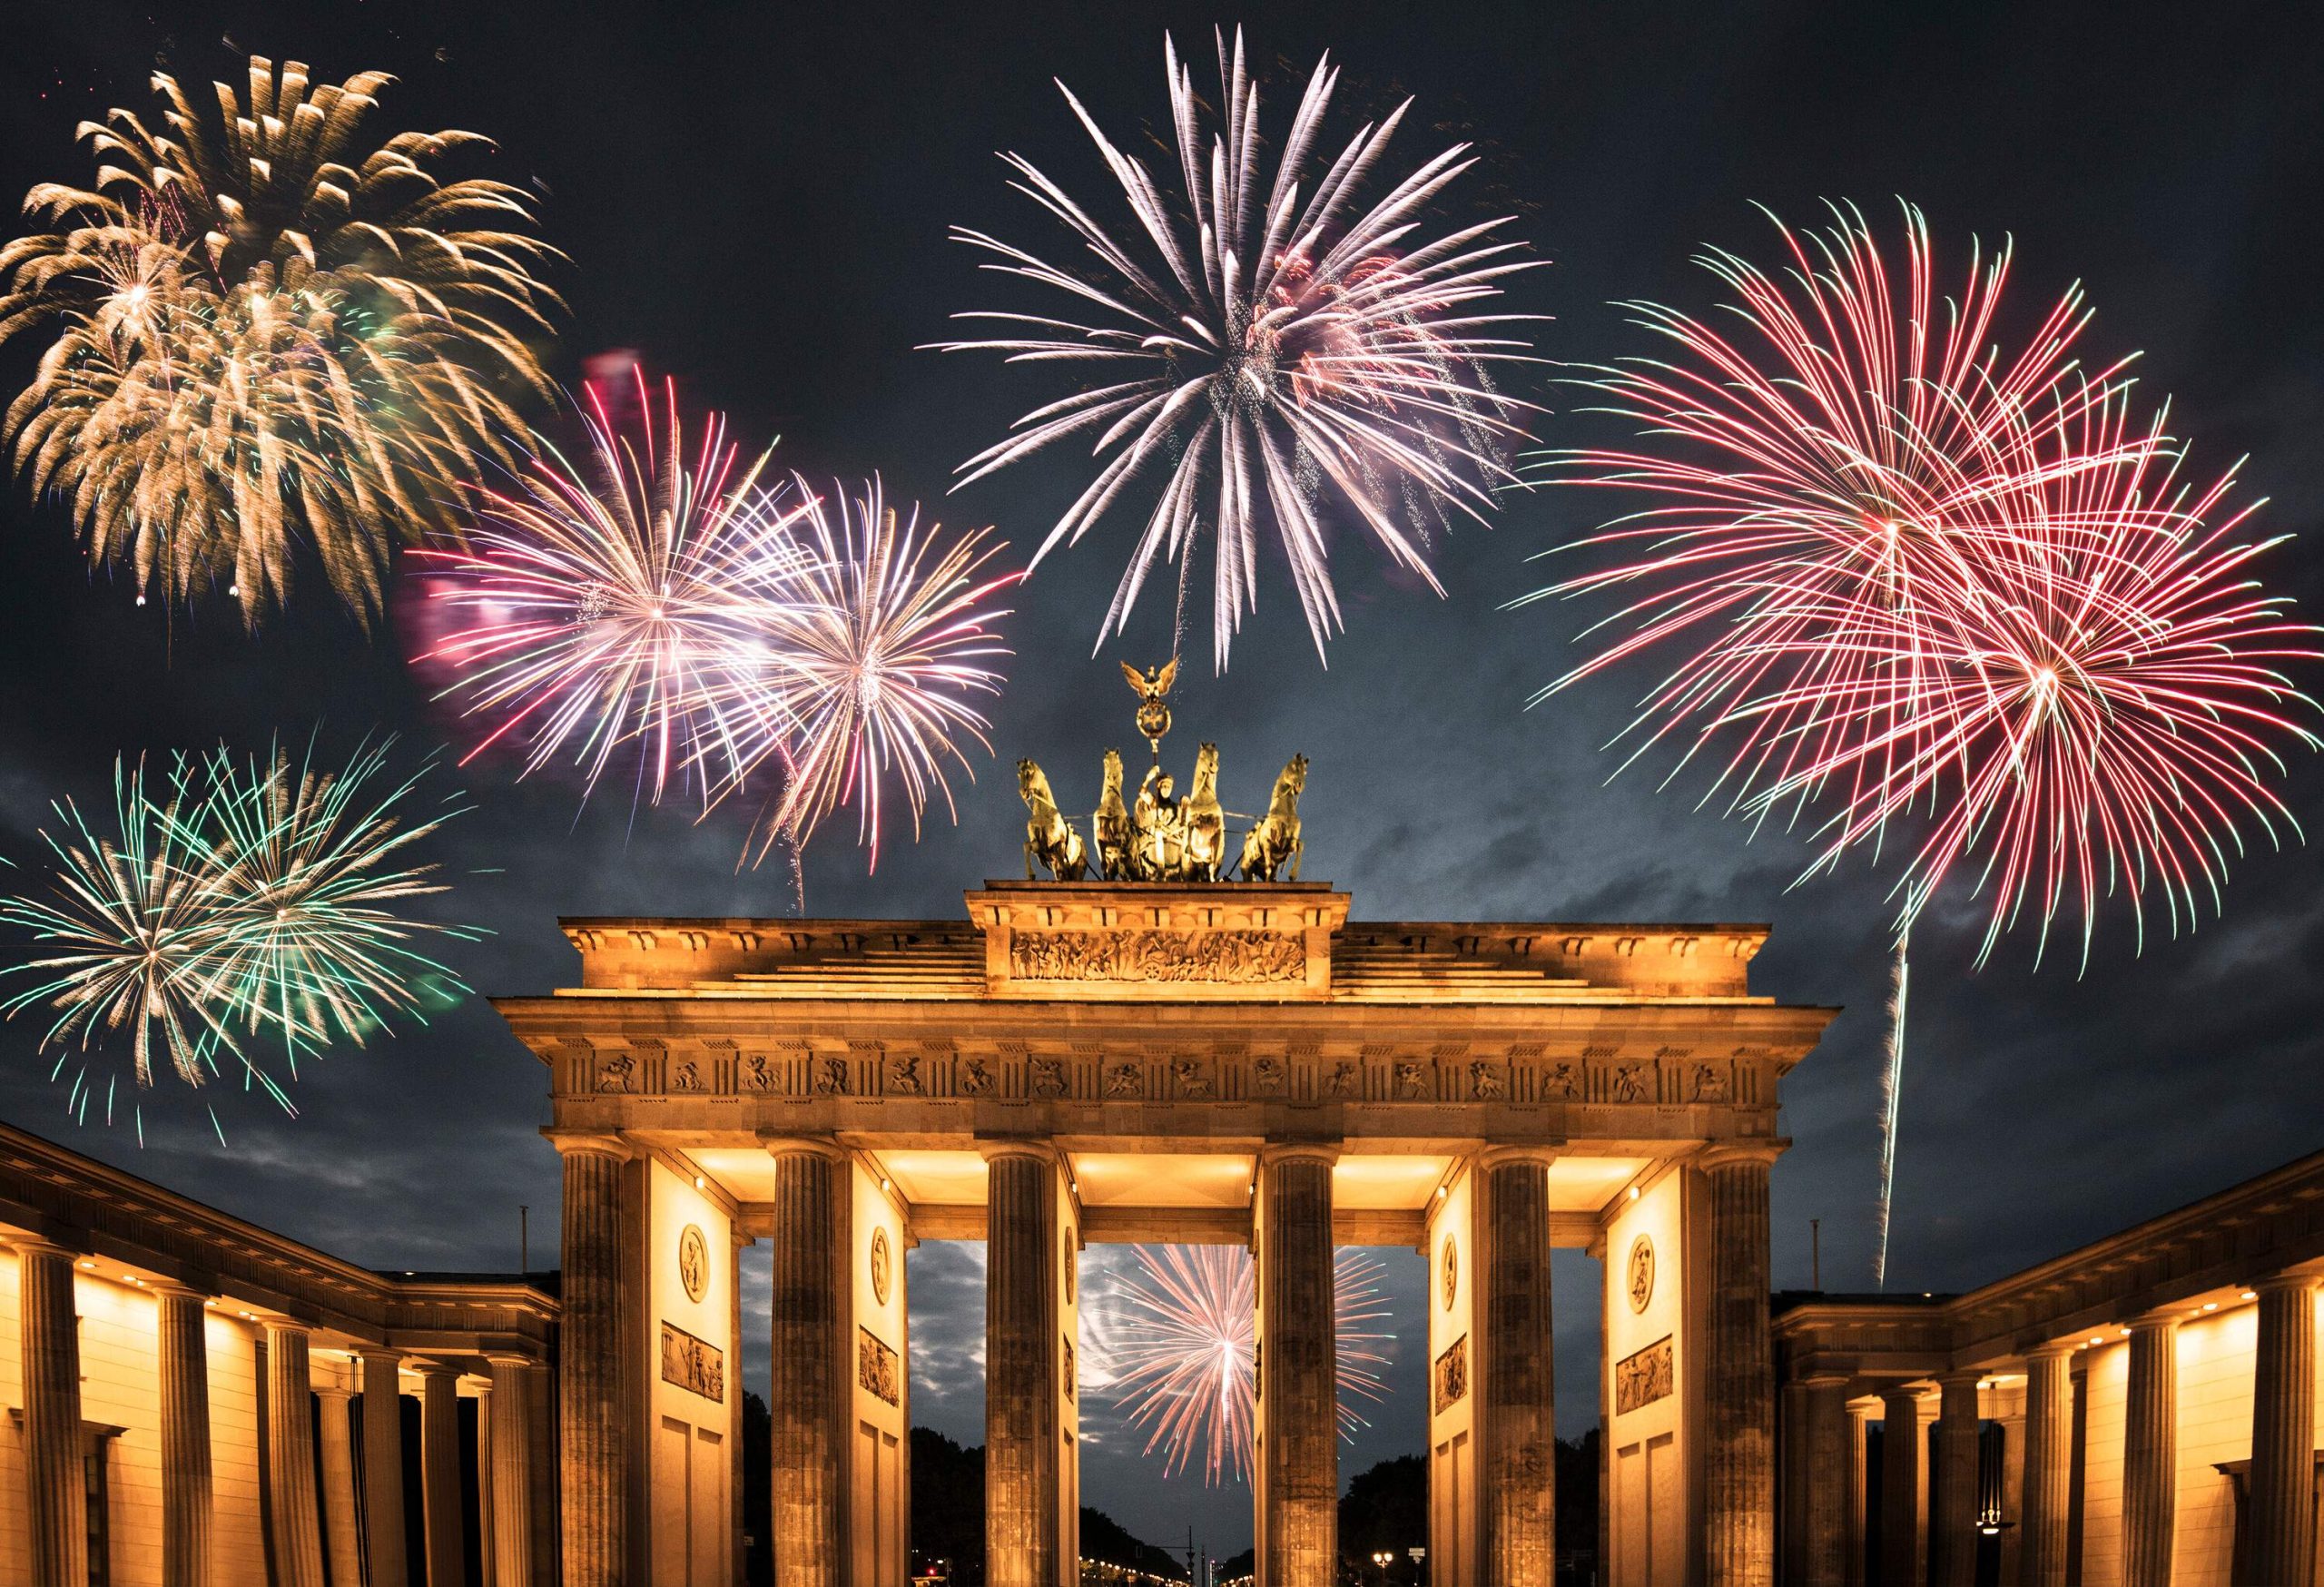 Colourful fireworks explode in the night sky as seen from the illuminated Brandenburg Gate in Berlin.